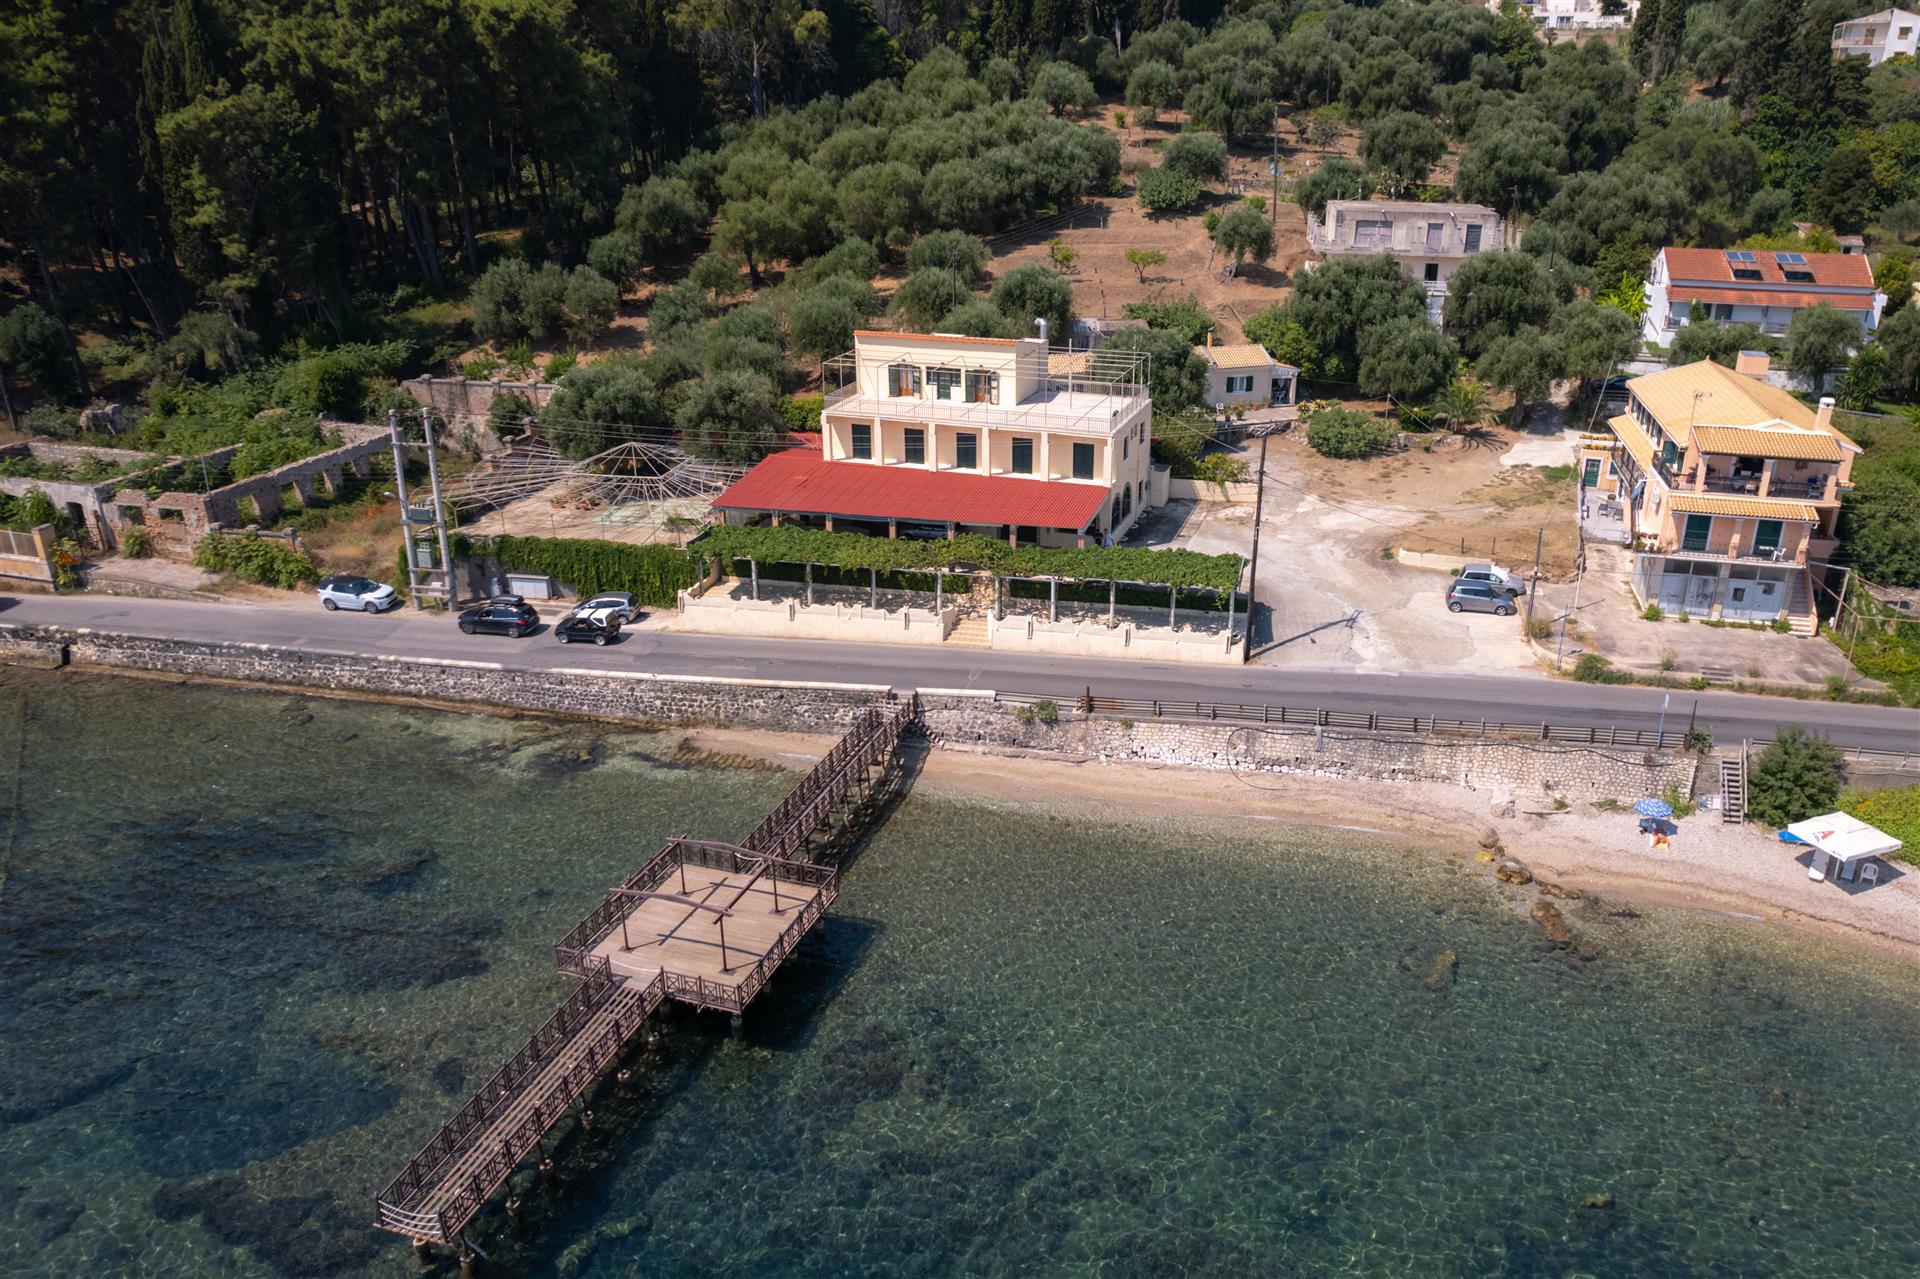 Commercial and residential complex on the eastern coast of Corfu